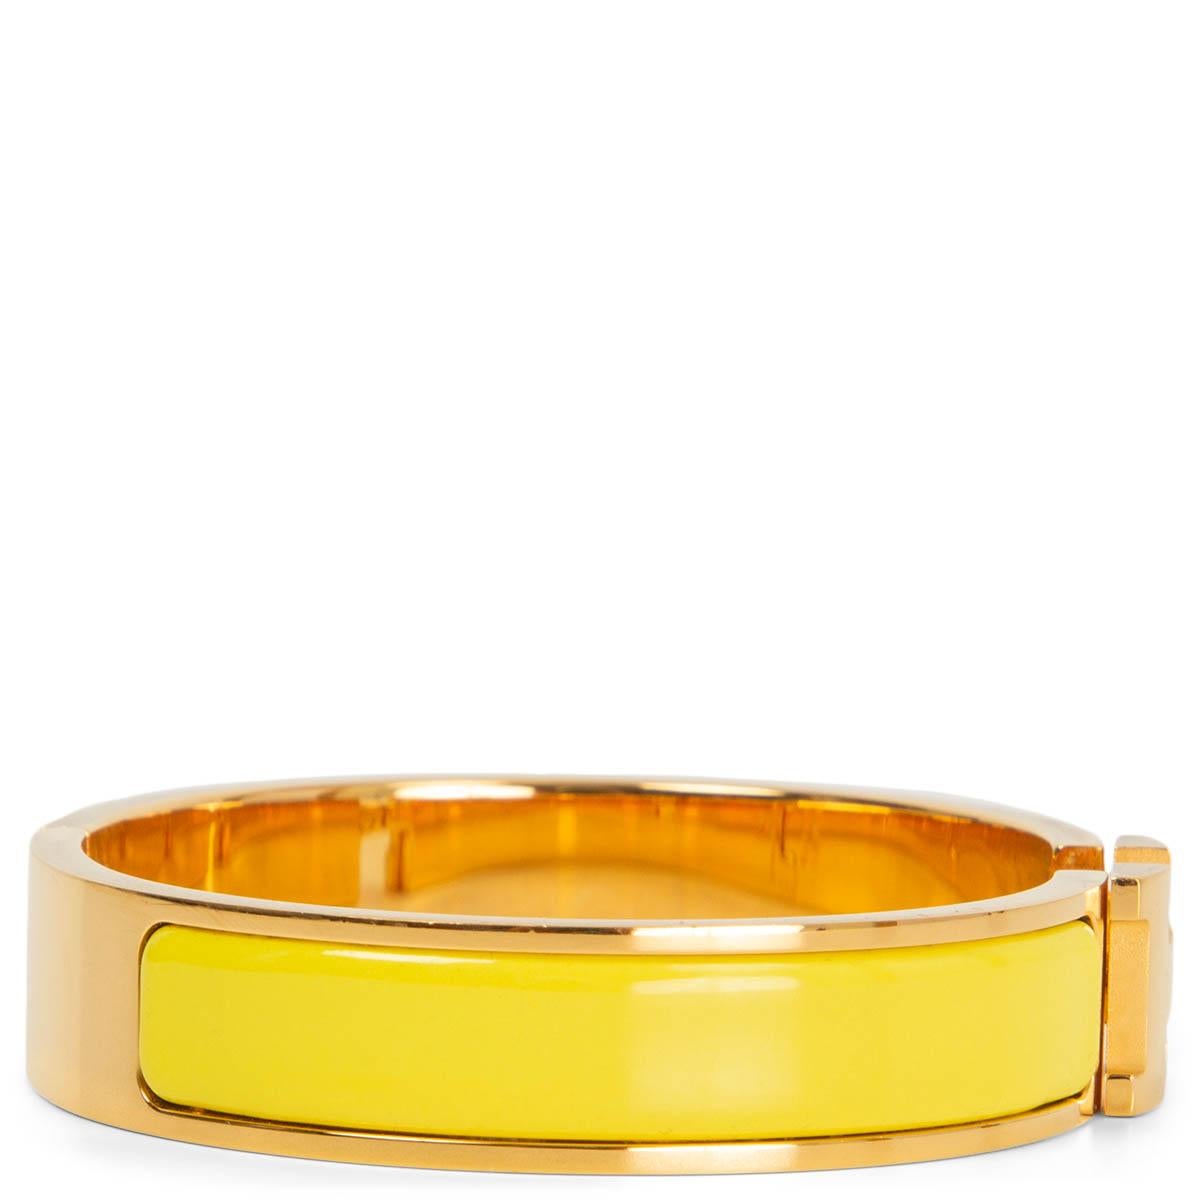 100% authentic Hermès Clic H PM bracelet in jaune Tennis enamel and with yellow gold plated hardware. Has been worn with very faint scratches to the hardware. Overall in excellent condition. Comes with pouch. 

Measurements
Width	1.2cm